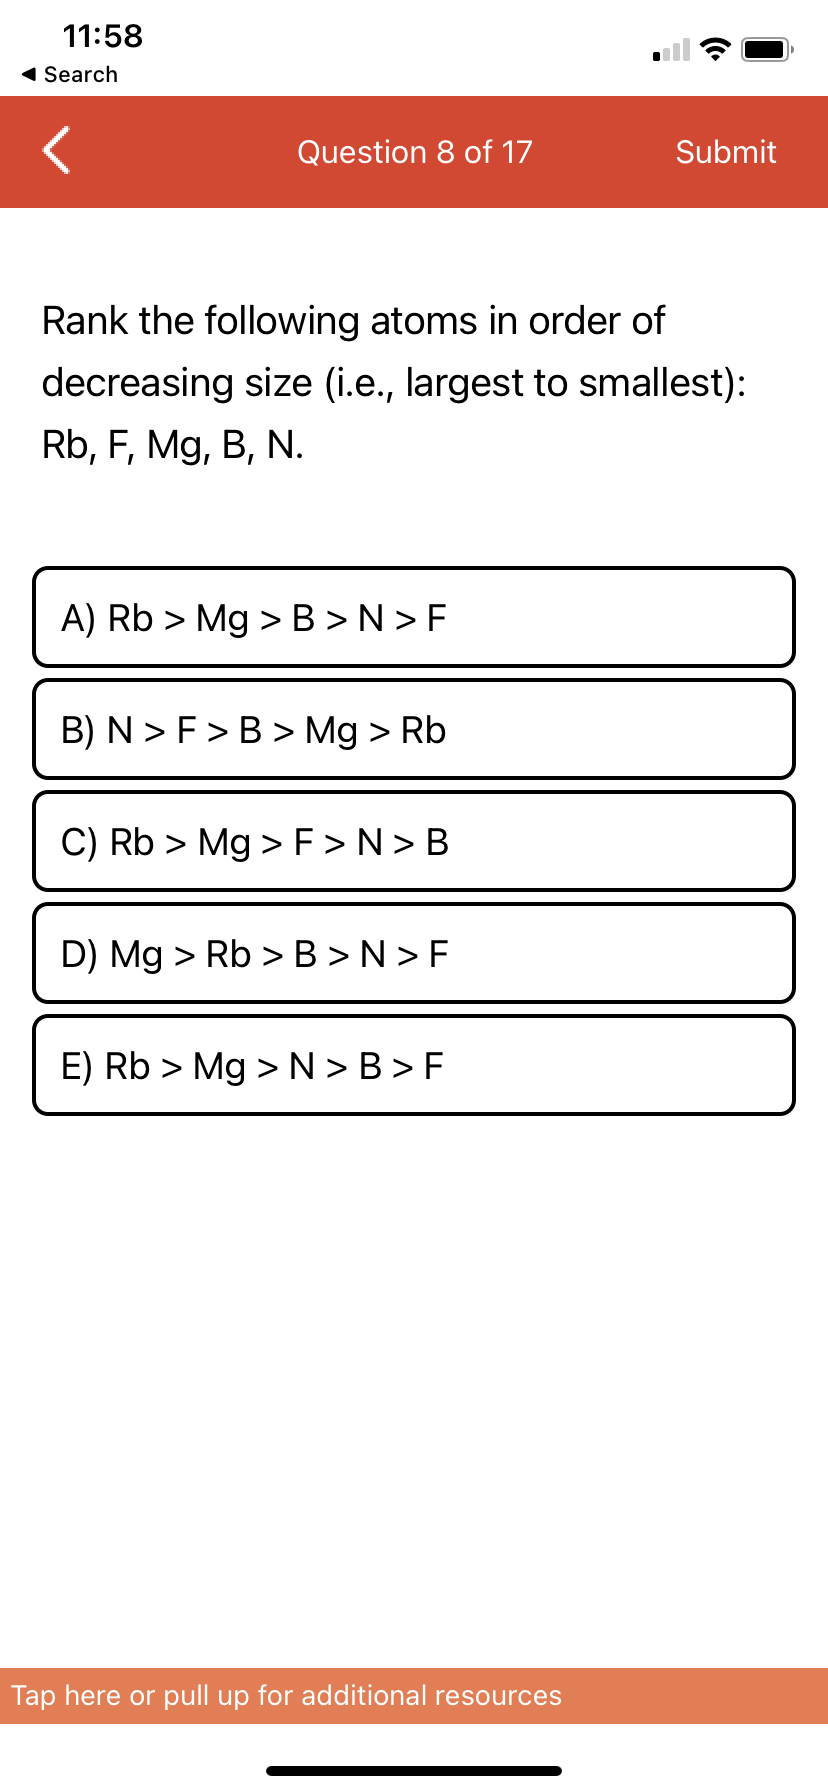 11:58
1 Search
Question 8 of 17
Submit
Rank the following atoms in order of
decreasing size (i.e., largest to smallest):
Rb, F, Mg, B, N.
A) Rb > Mg >B >N > F
B) N > F>B > Mg > Rb
C) Rb > Mg > F >N> B
D) Mg > Rb >B >N > F
E) Rb > Mg >N > B > F
Tap here or pull up for additional resources
